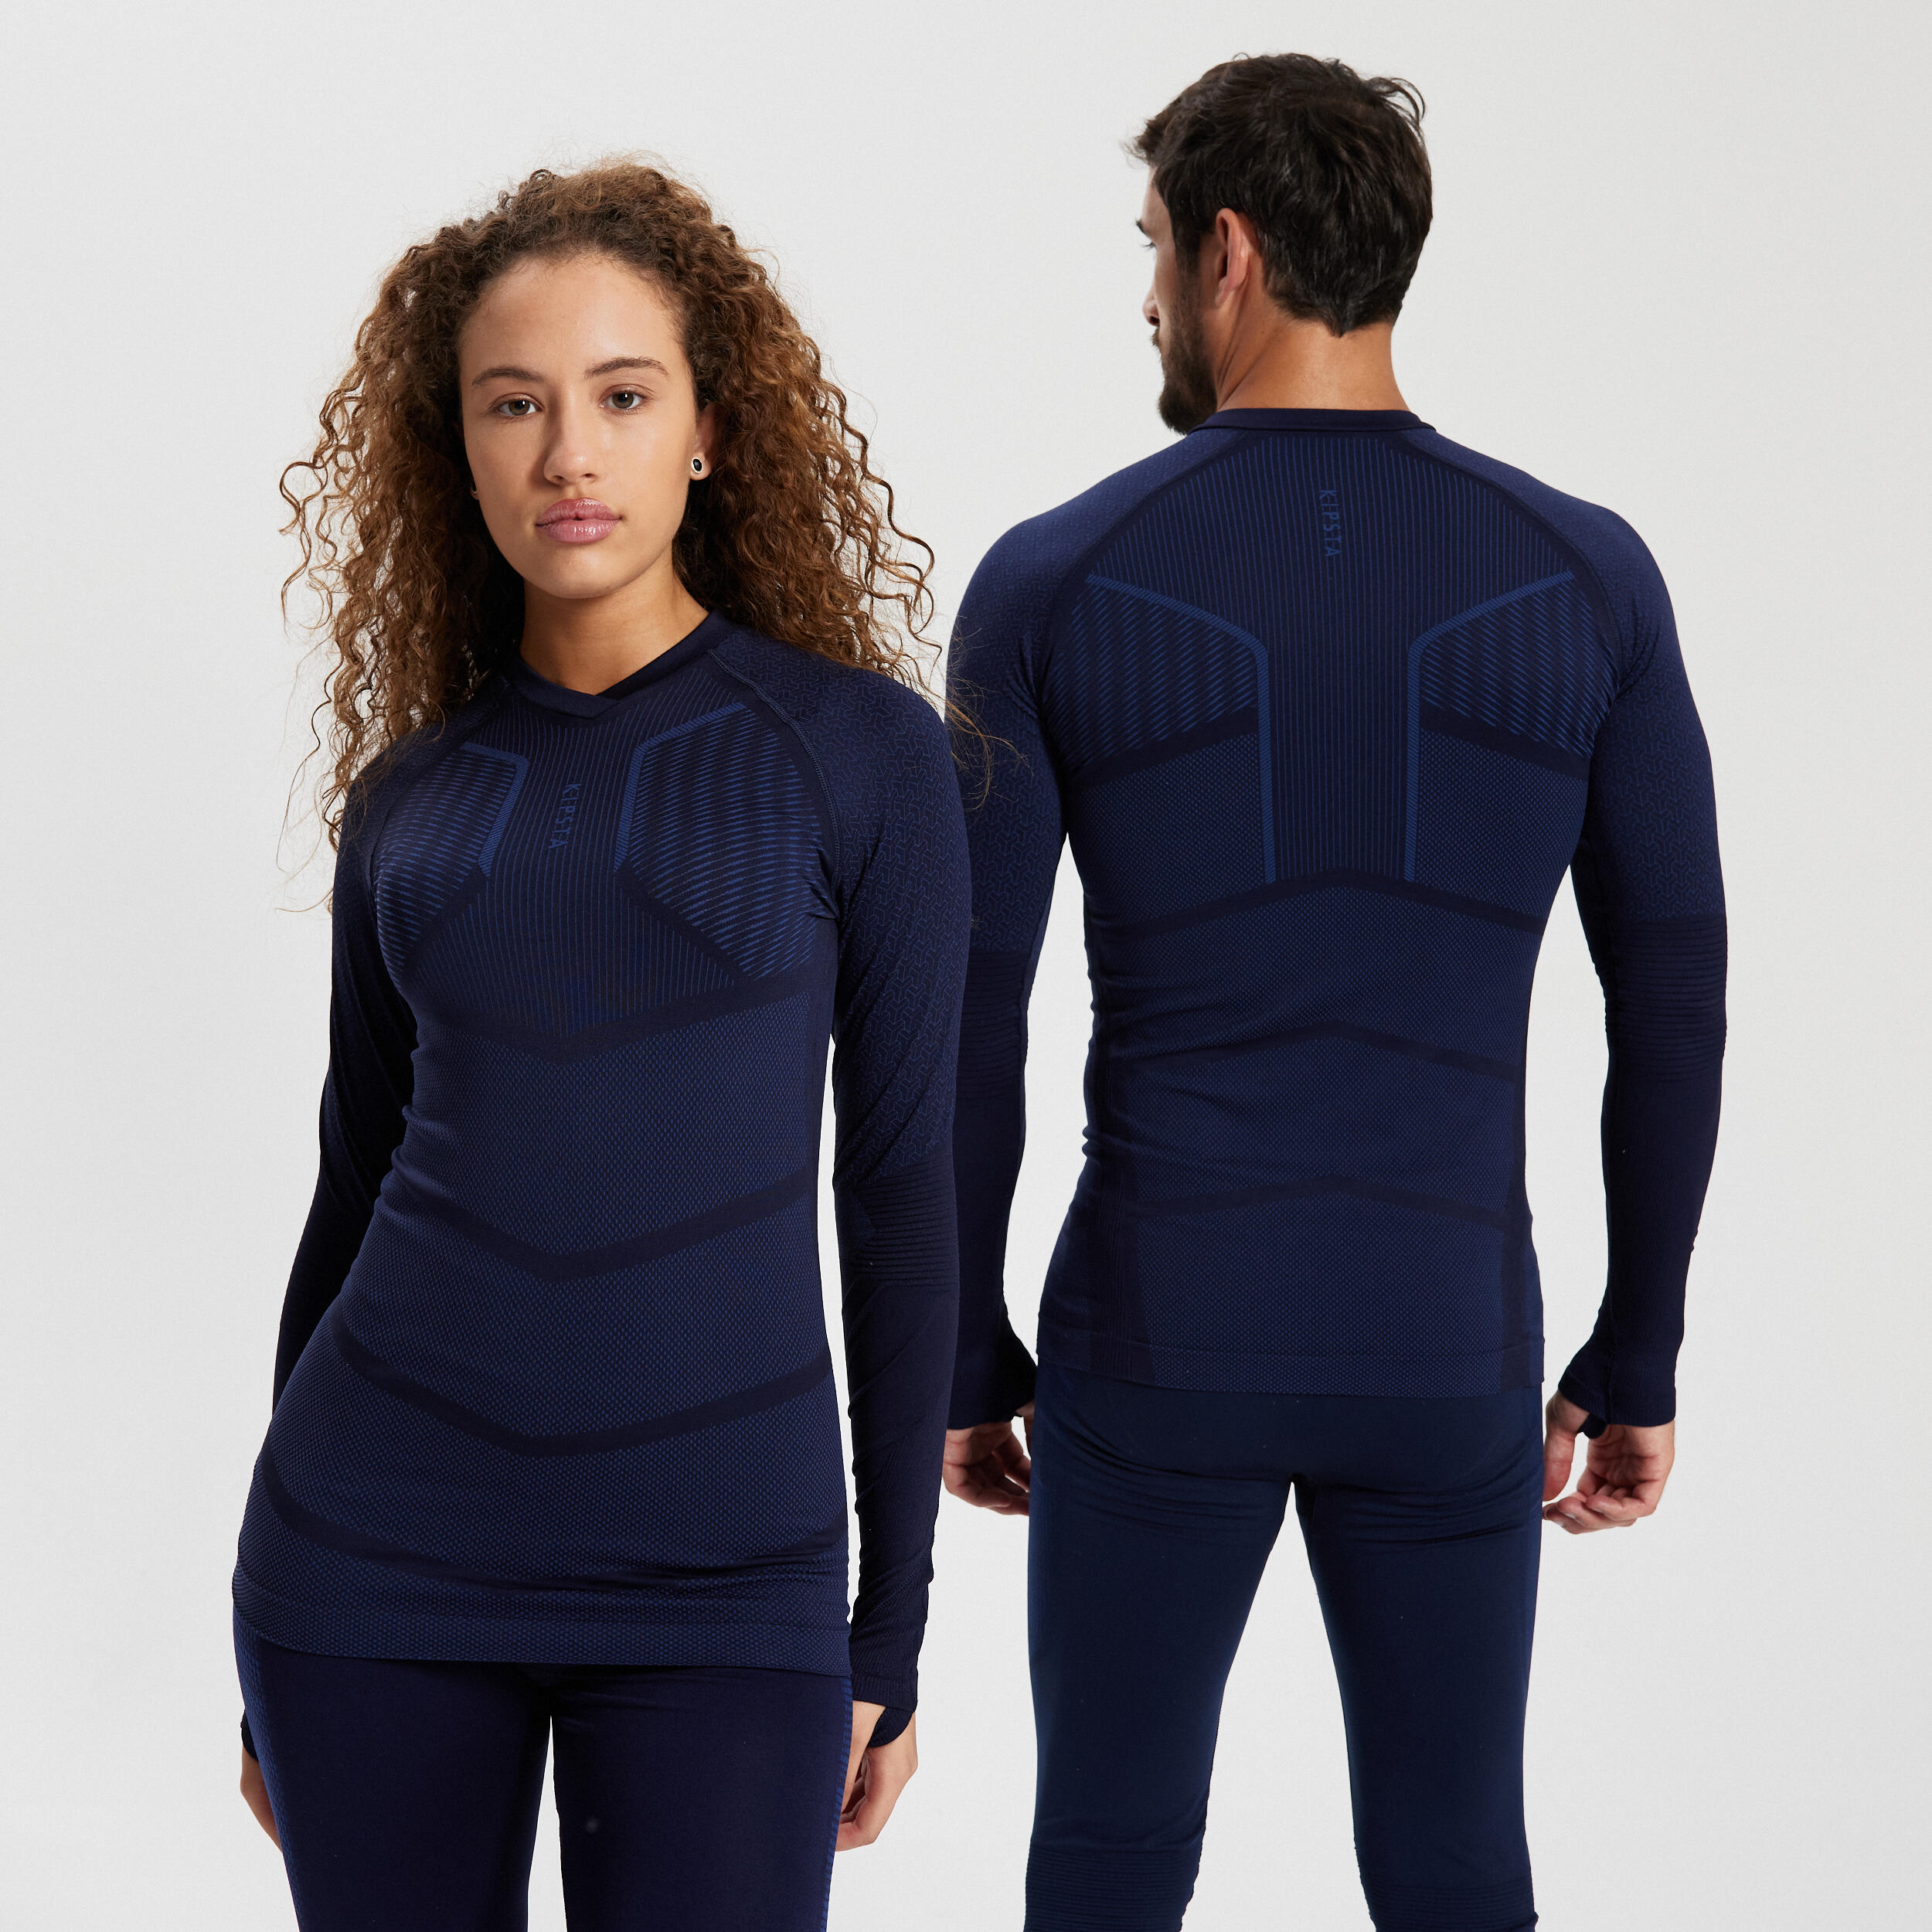 Adult Long-Sleeved Thermal Base Layer Top Keepdry 500 - Navy Blue 3/14